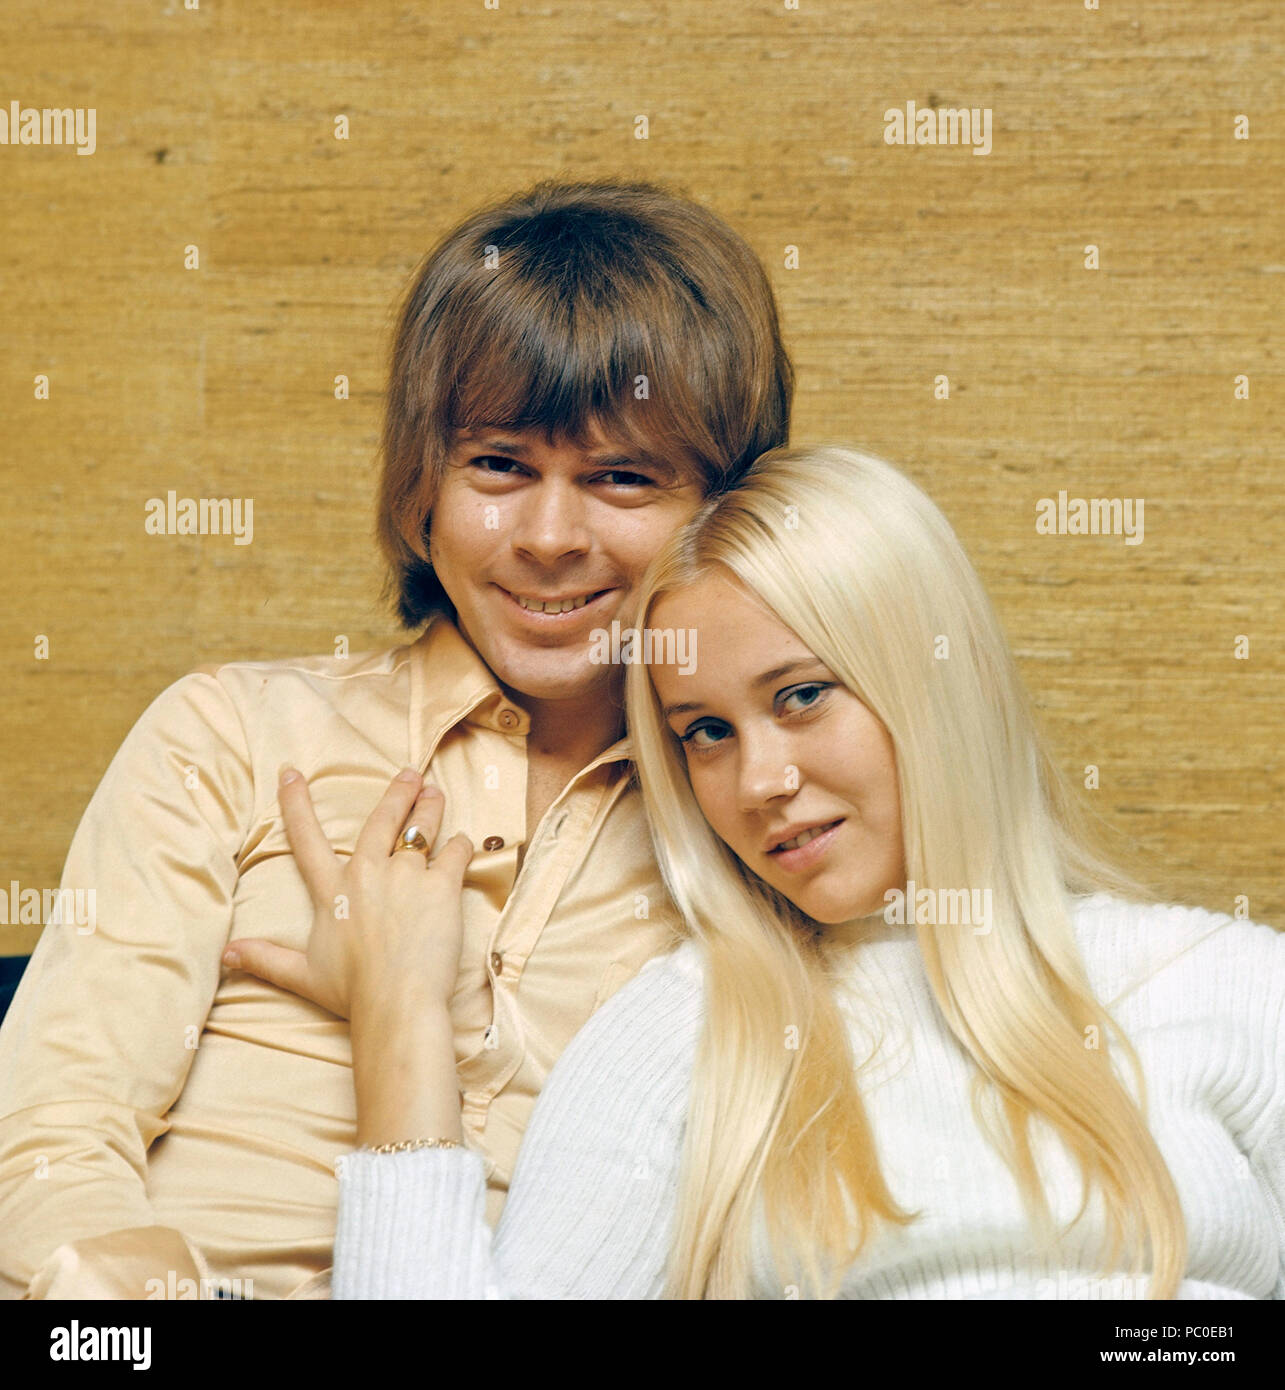 Agnetha Fältskog. Singer. Member of the pop group ABBA. Born 1950. Pictured here at home with her fiance Björn Ulvaeus 1970 whom she married on 6 July 1971.  Photo: Kristoffersson Stock Photo